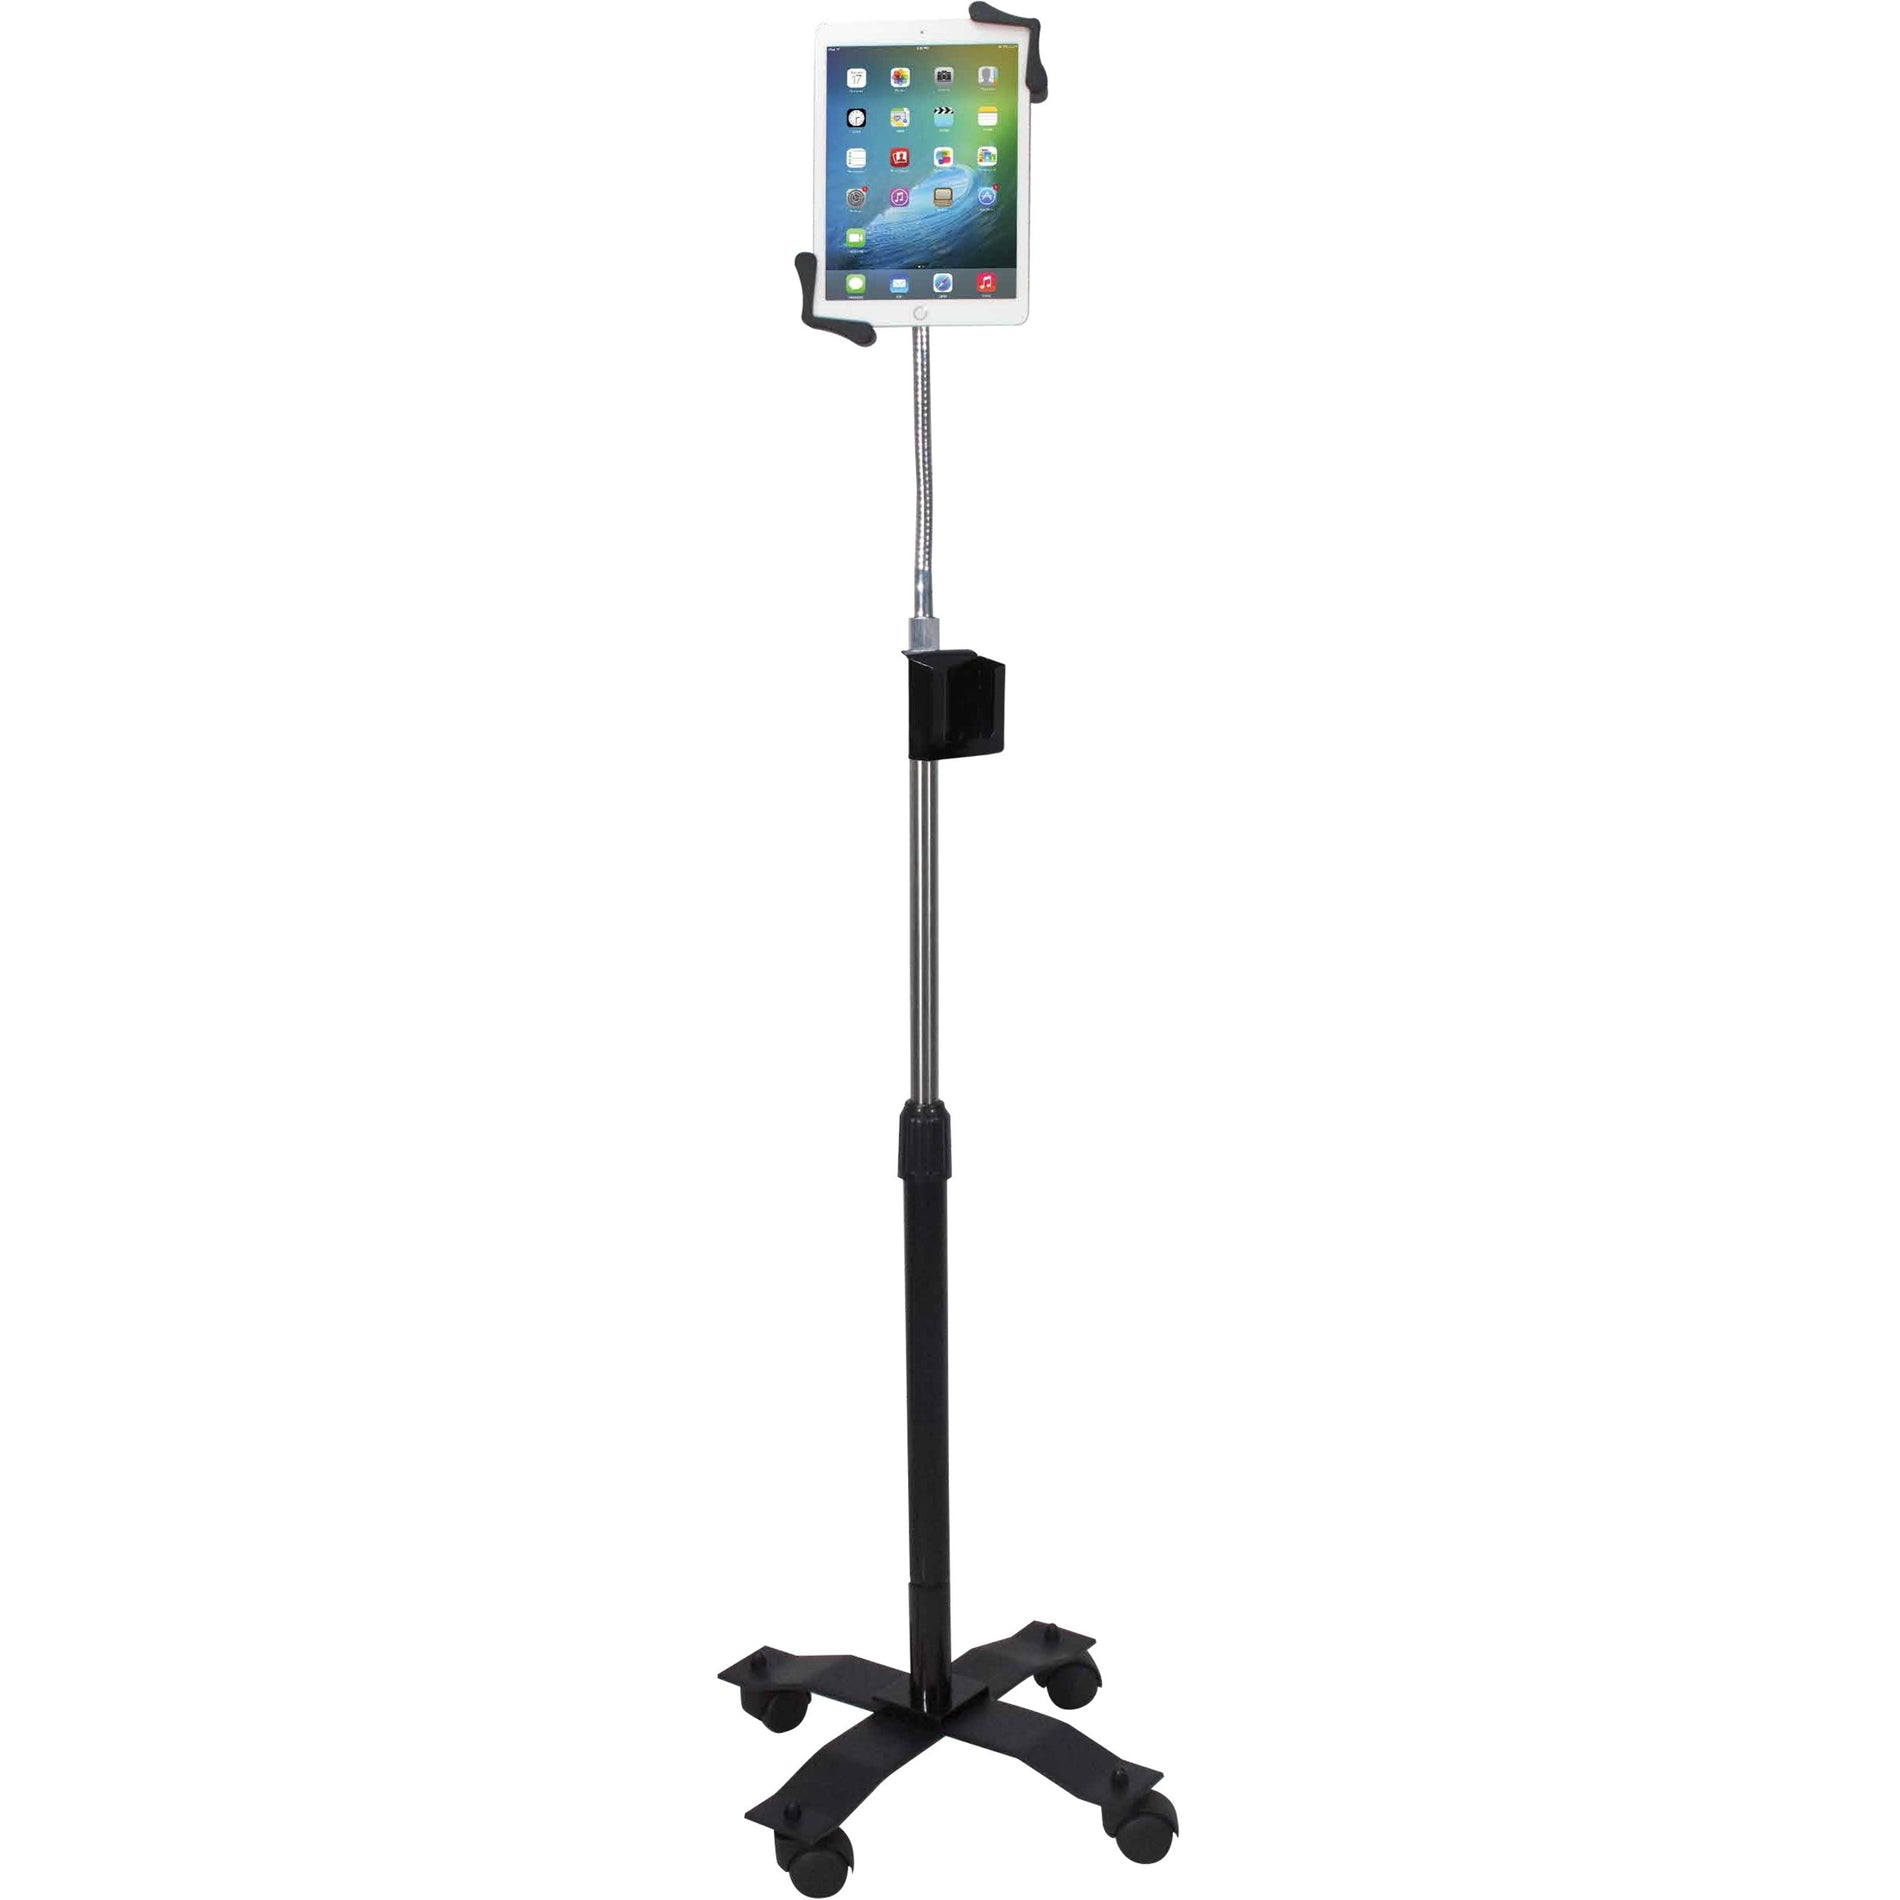 CTA Digital PAD-CGS Compact Floor Stand w/ Gooseneck for 7-13" Tablets, Flexible, 360° Rotation, Tilt, Durable, Sturdy, Tablet Holder, Swivel Casters, Mobility